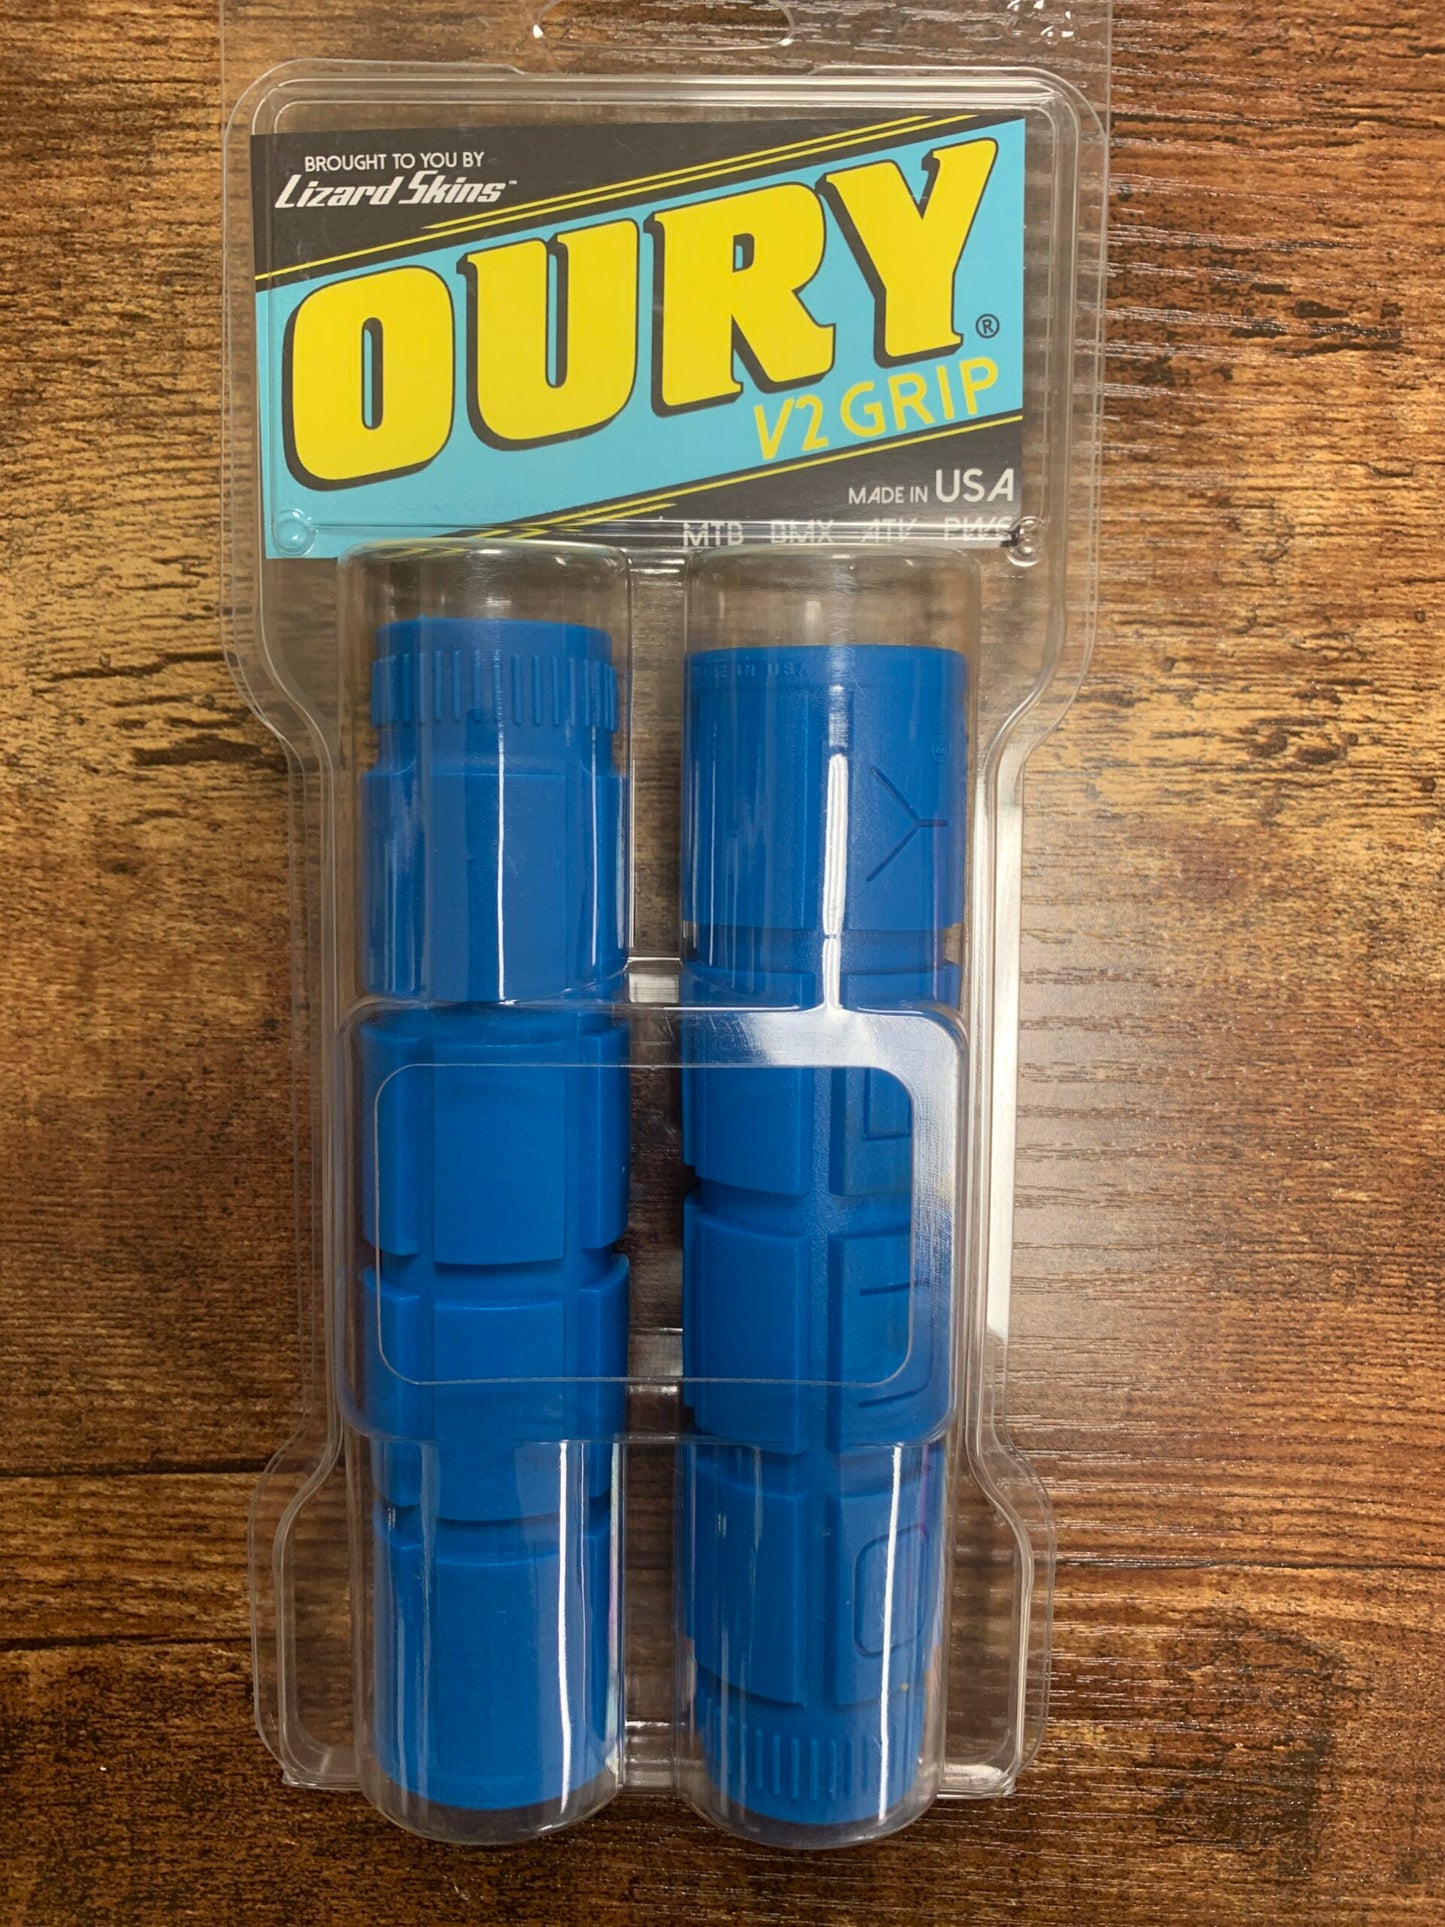 OURY V2 GRIPS